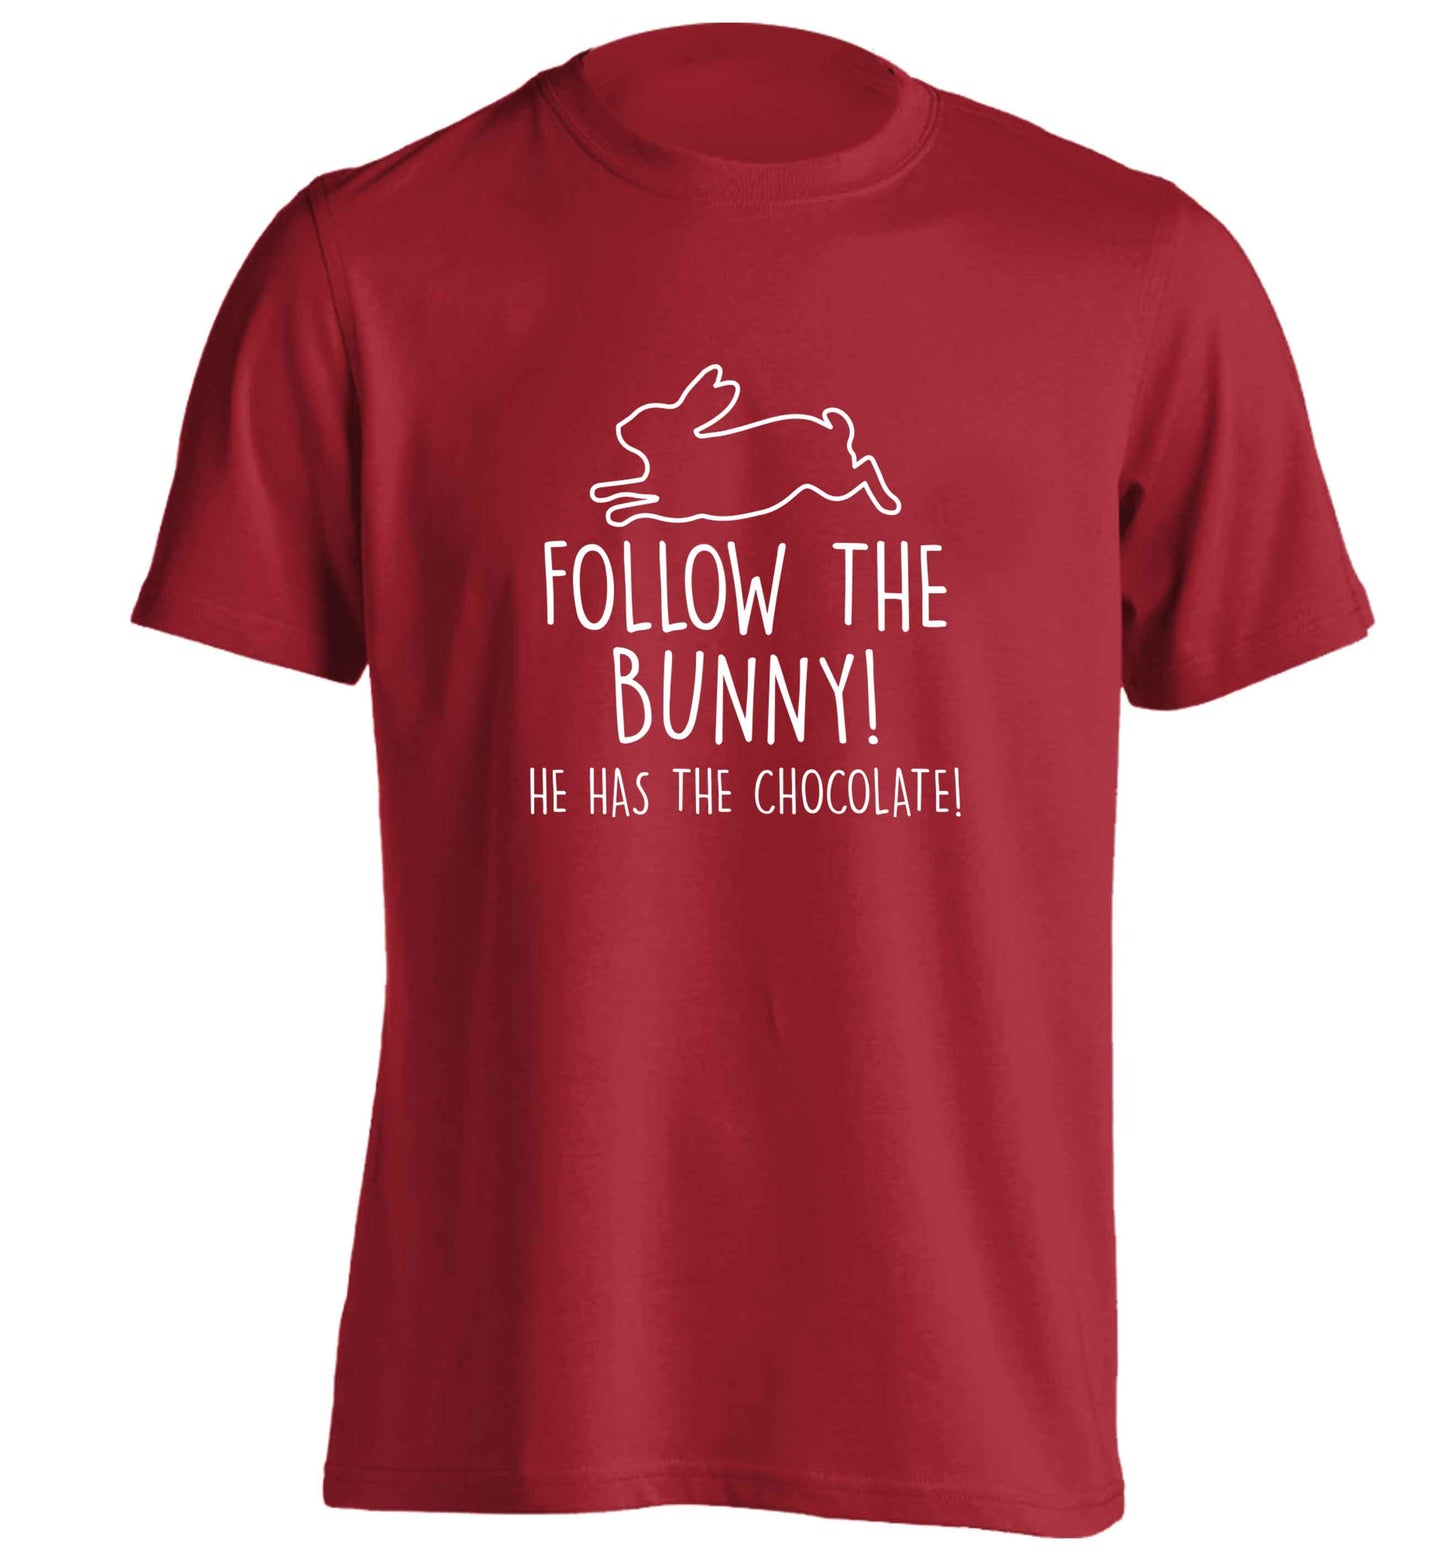 Follow the bunny! He has the chocolate adults unisex red Tshirt 2XL